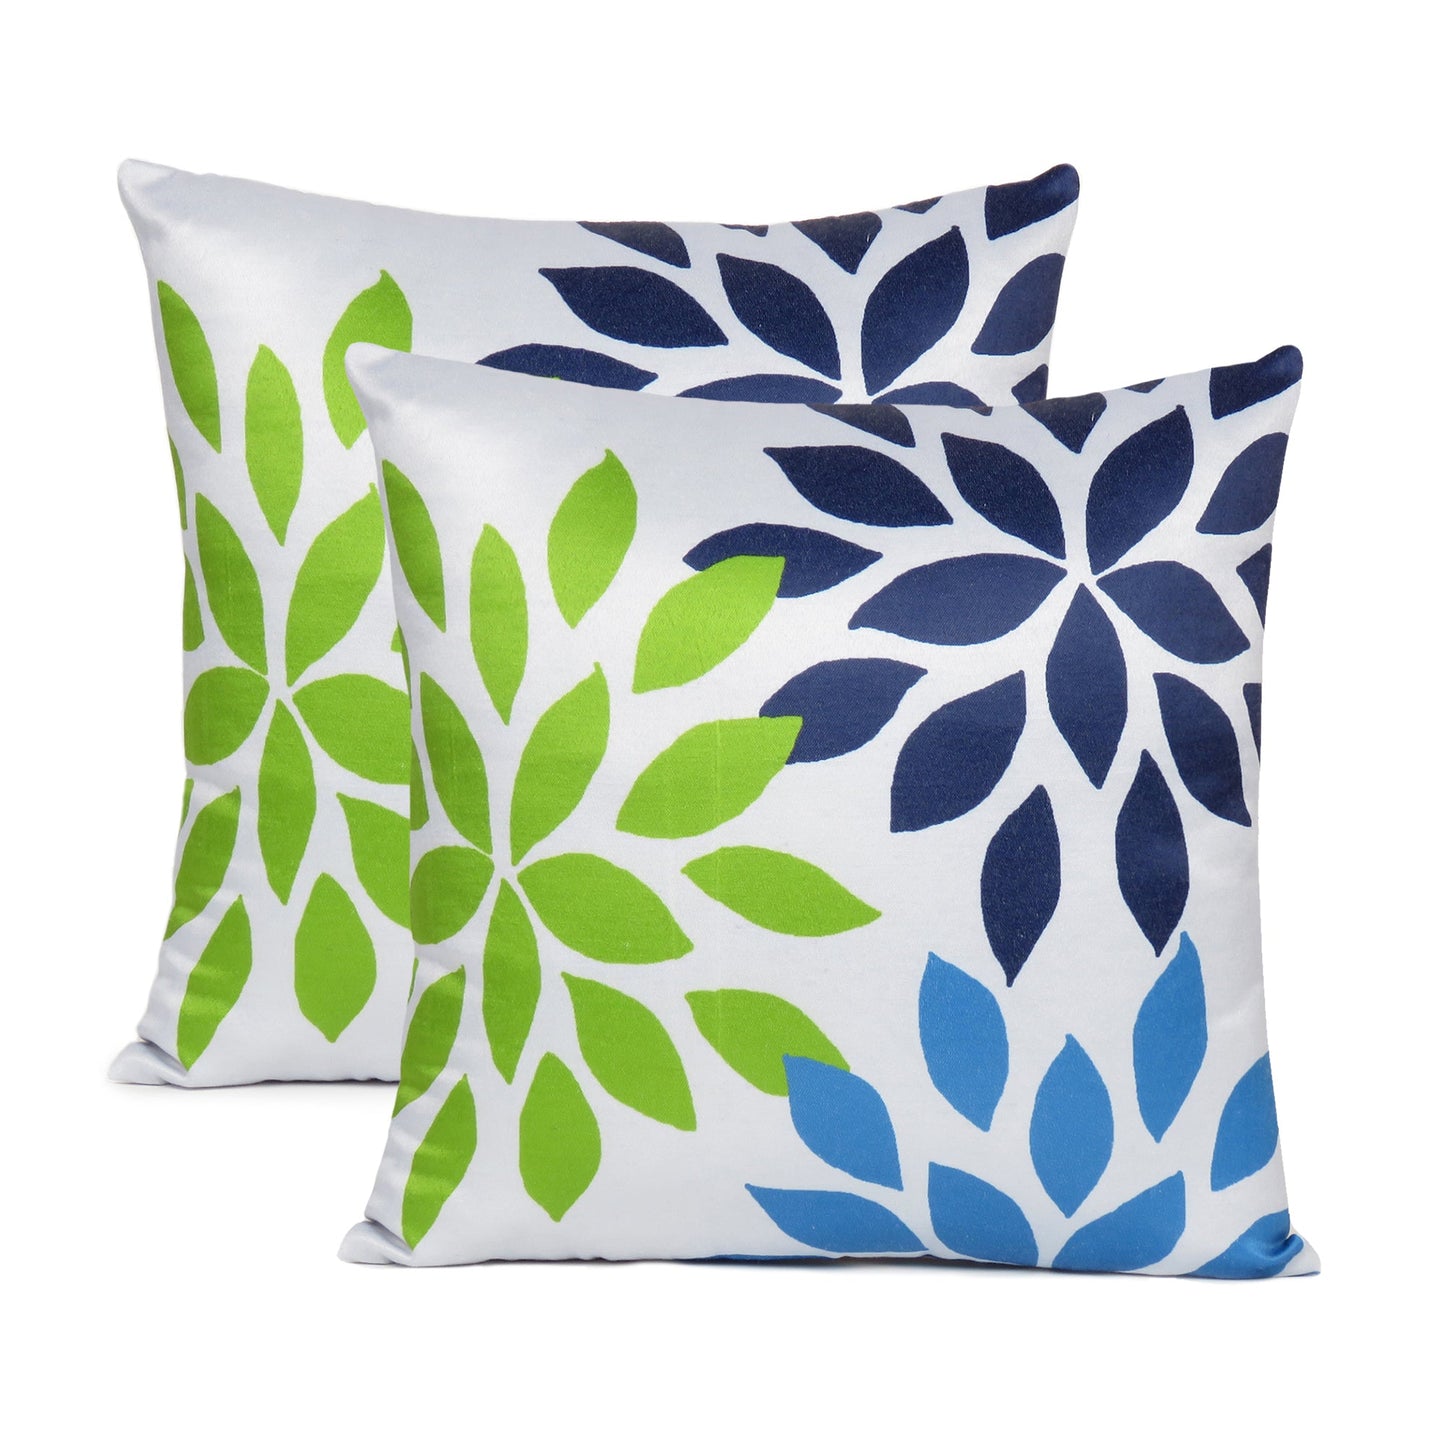 Multicolor Flower Burst Printed Cushion Cover in Set of 2